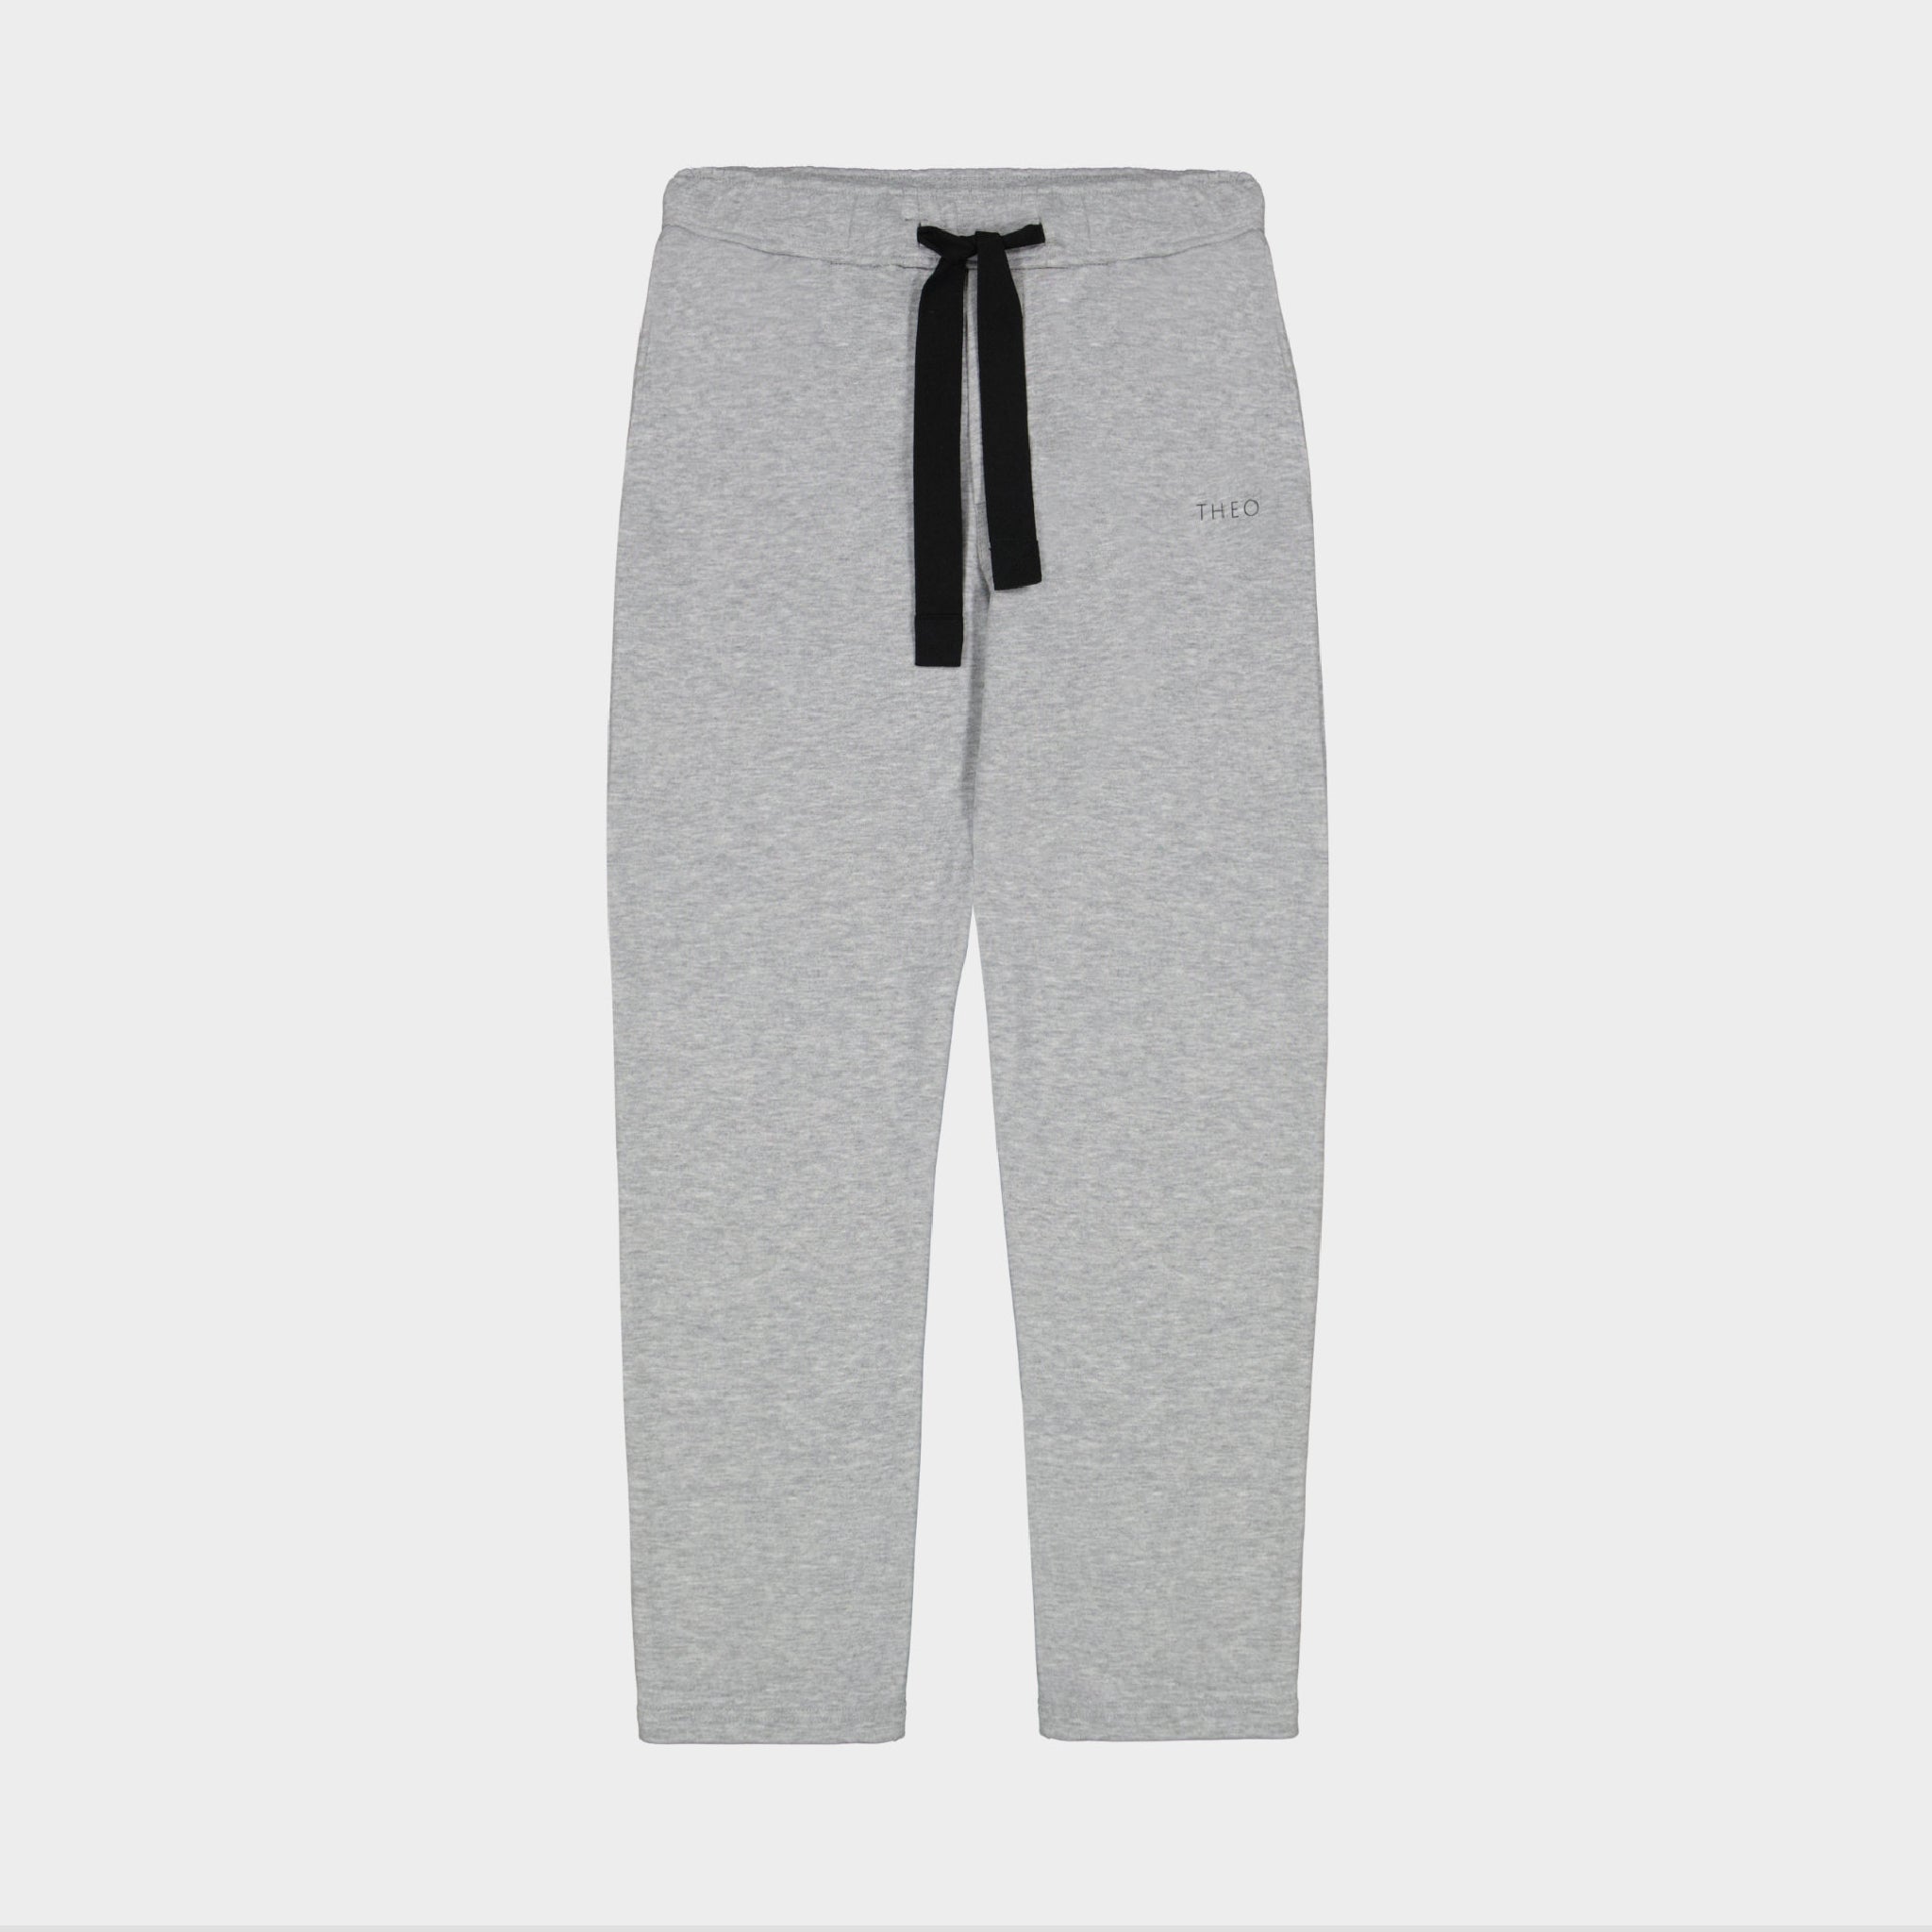 CROPPED SWEATPANTS WITH THEO LOGO